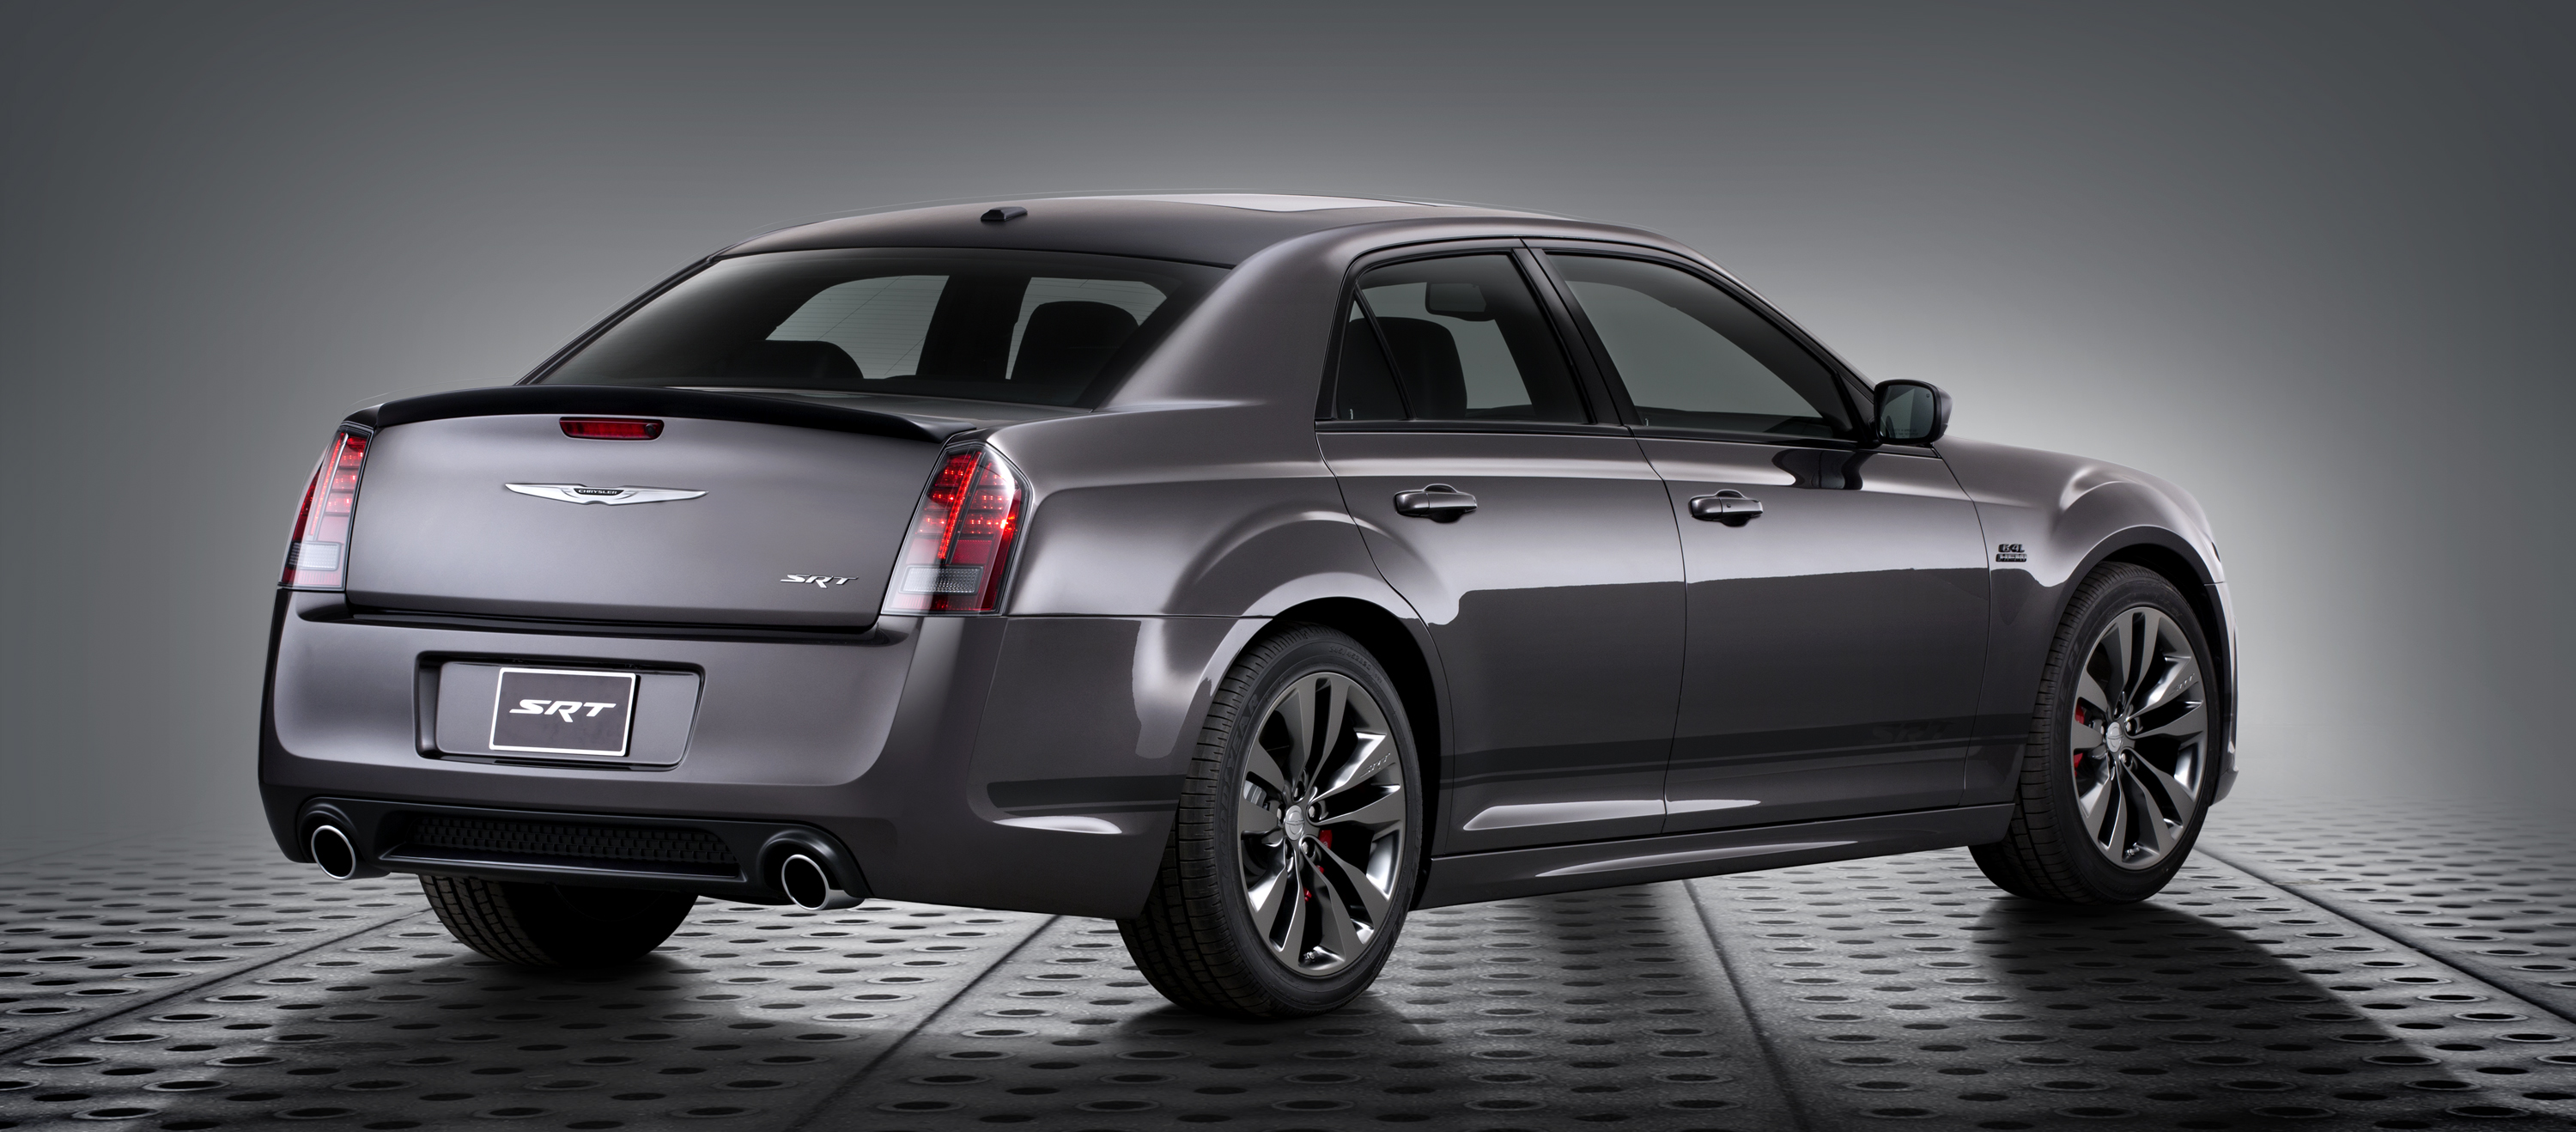 2014-chrysler-300-srt-is-bad-to-the-core-gaywheels